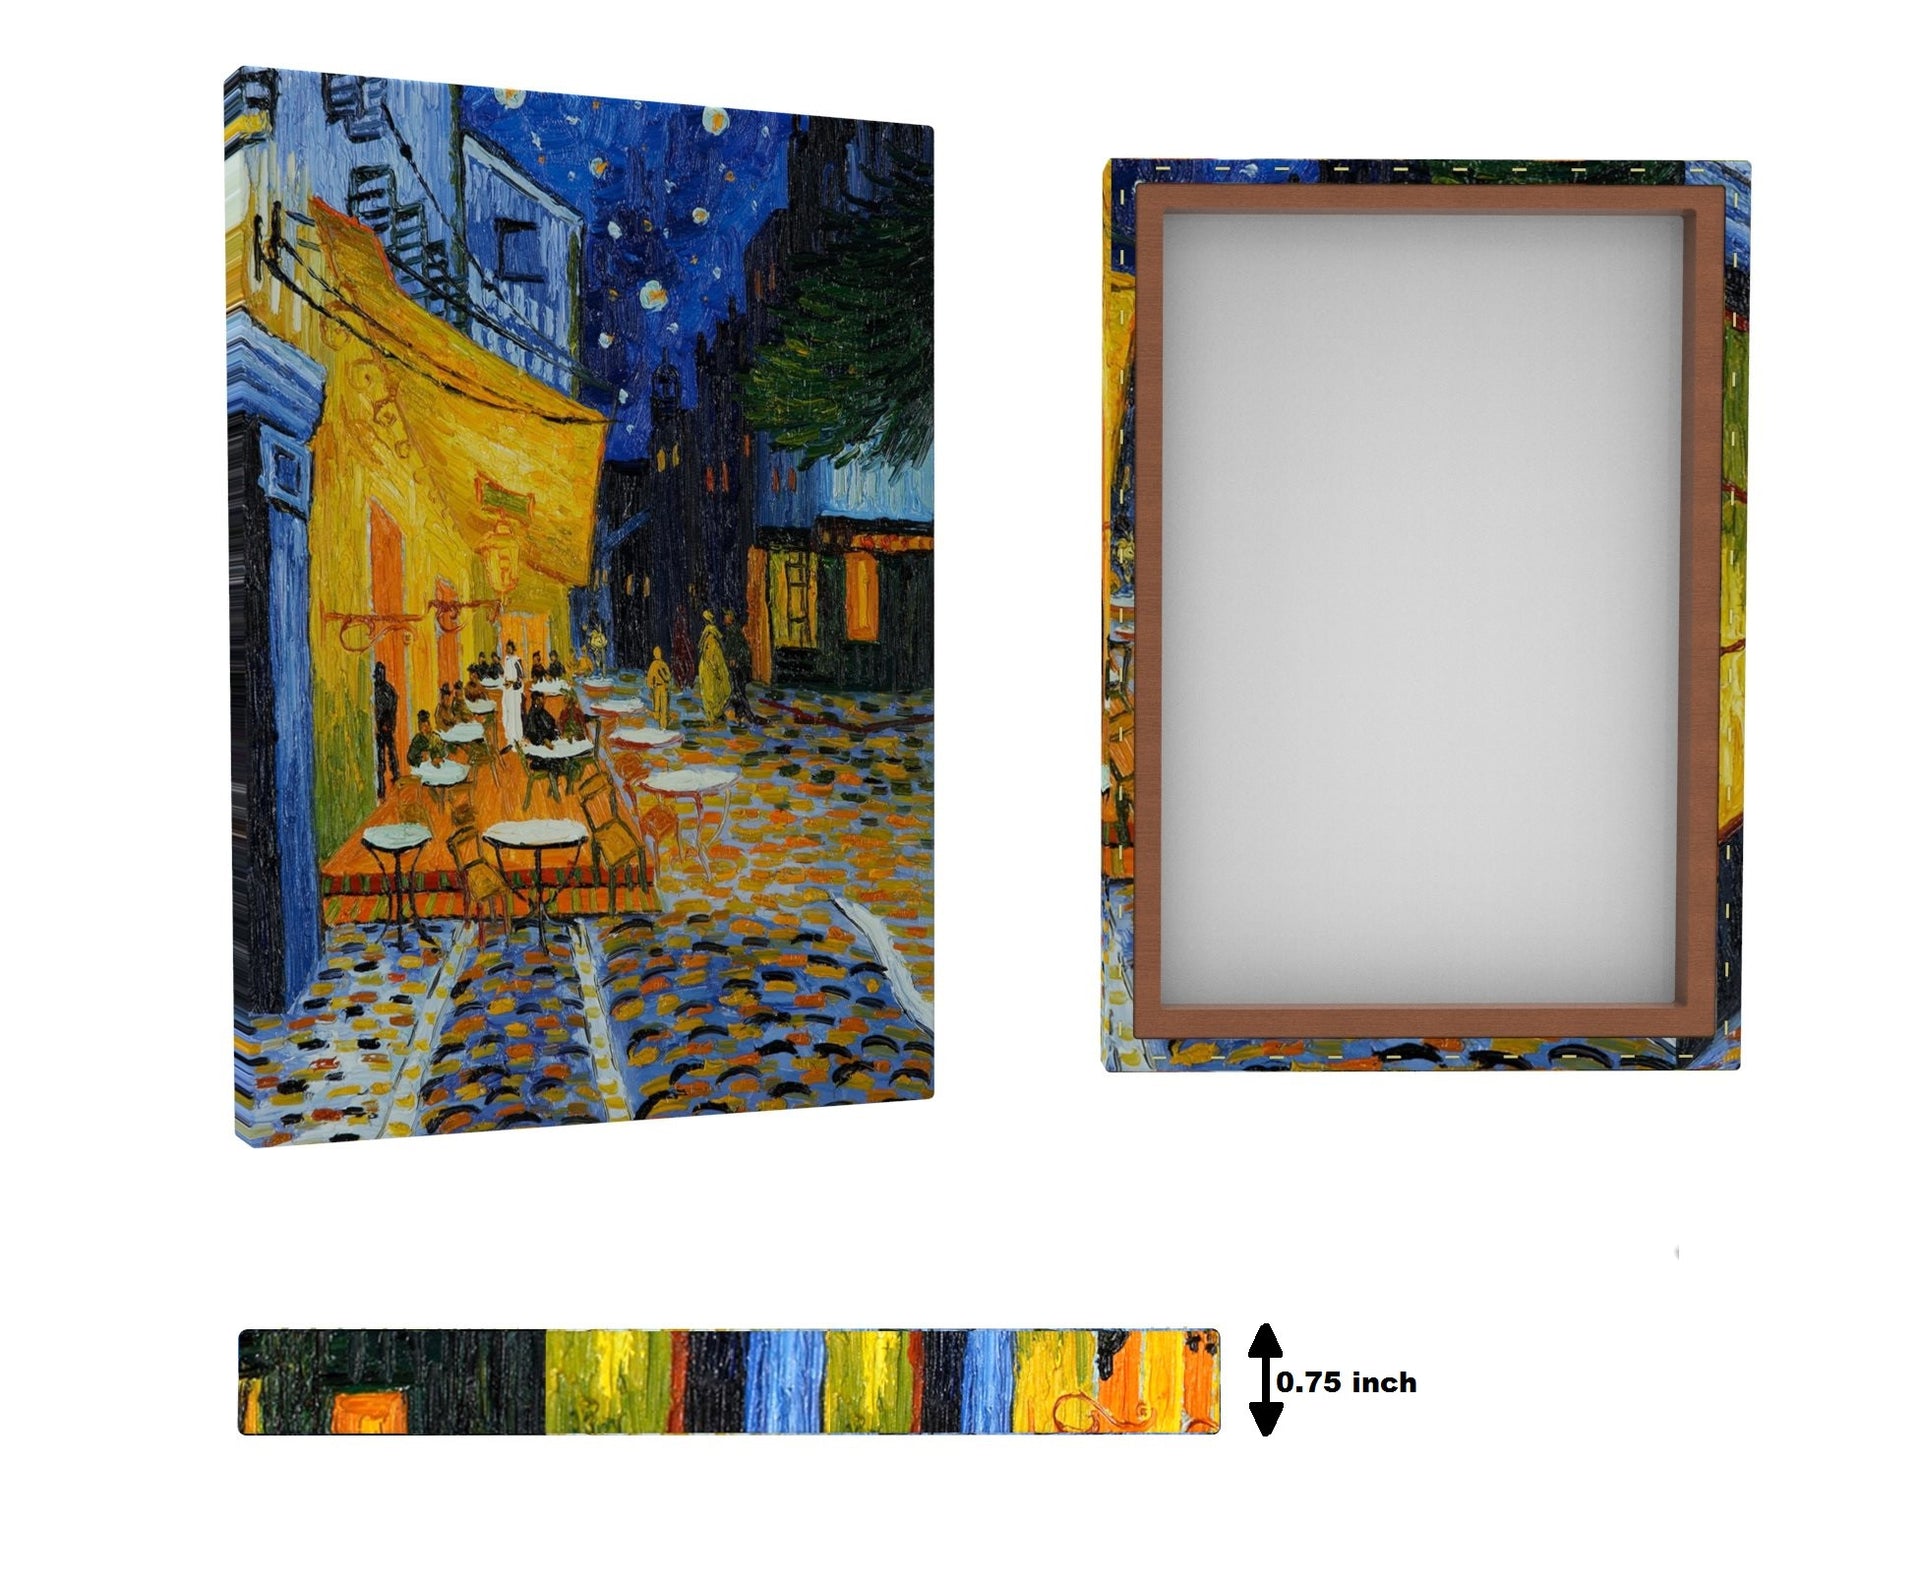 Piet Mondrian - Composition in Red Yellow and Blue - Get Custom Art